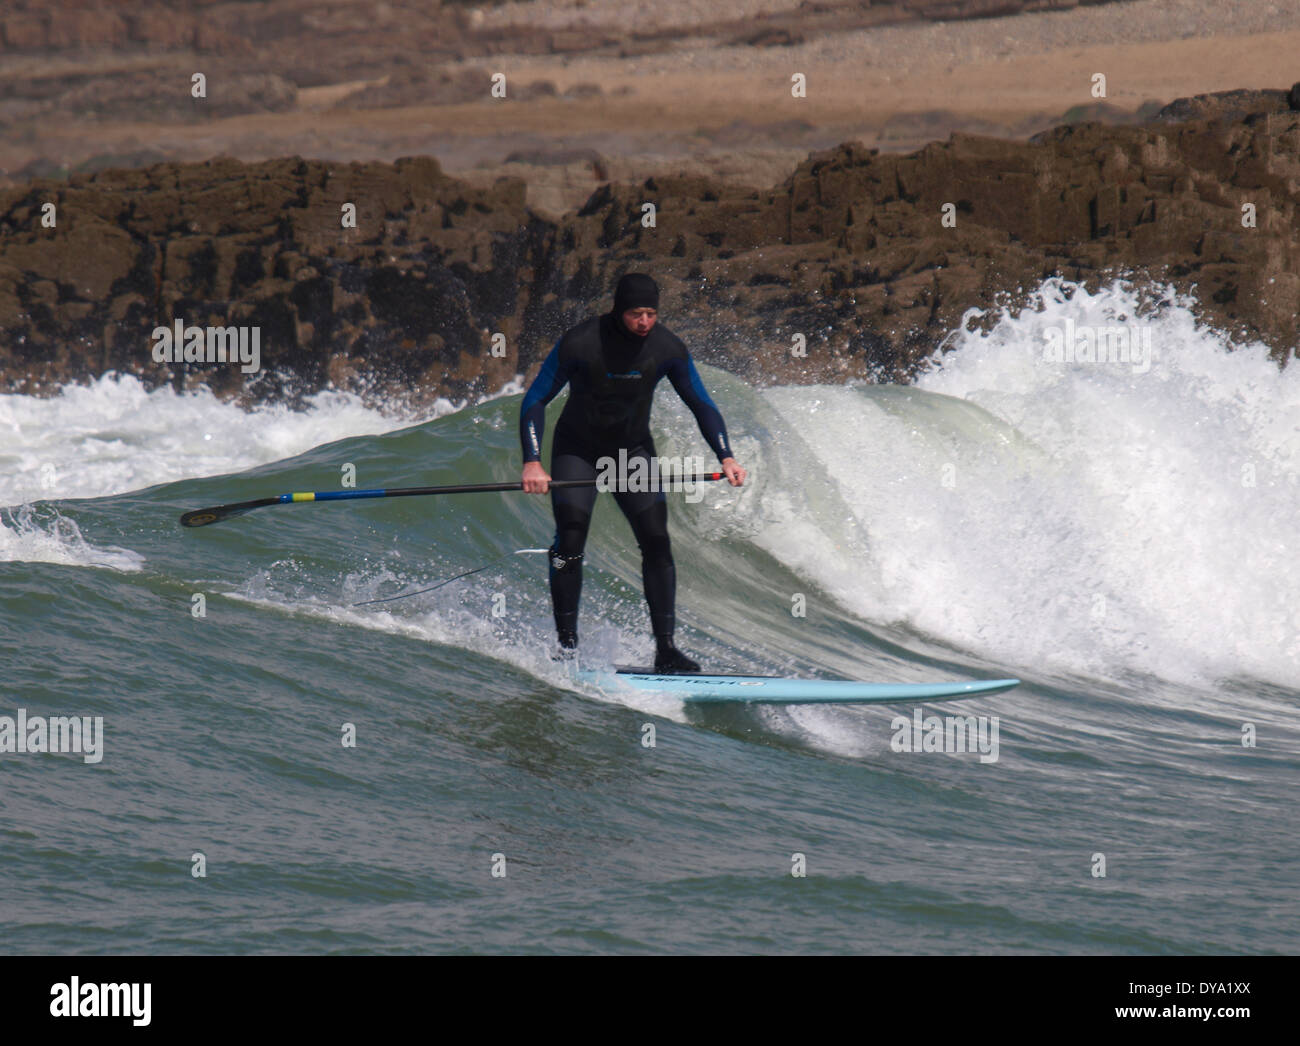 Stand Up Paddle boarder, Bude, Cornwall, UK Banque D'Images